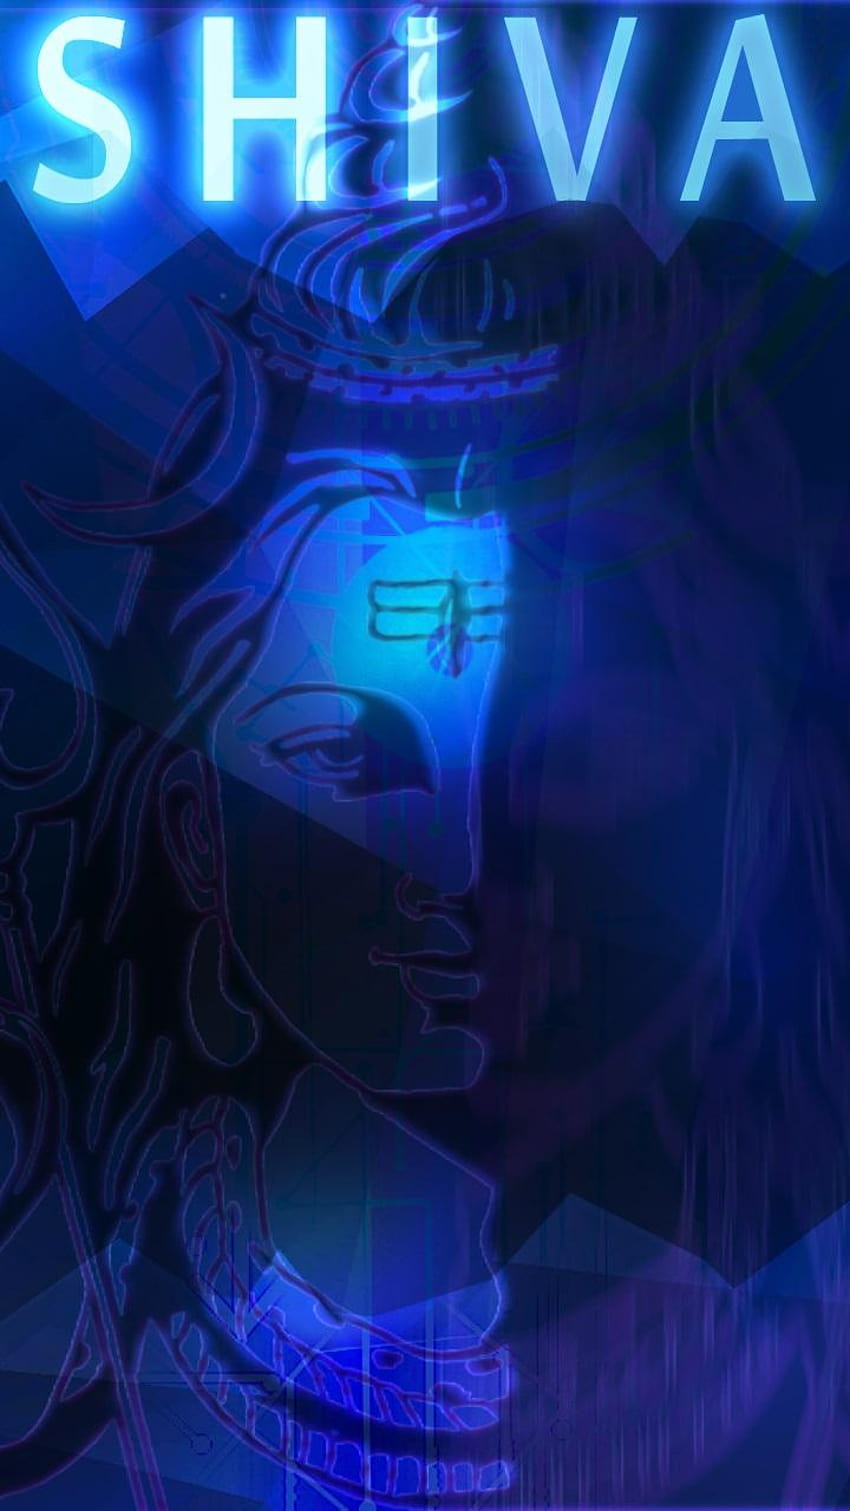 Lord Shiva Concentrating Mobile 720x1280, лорд Шива mobile HD тапет за телефон